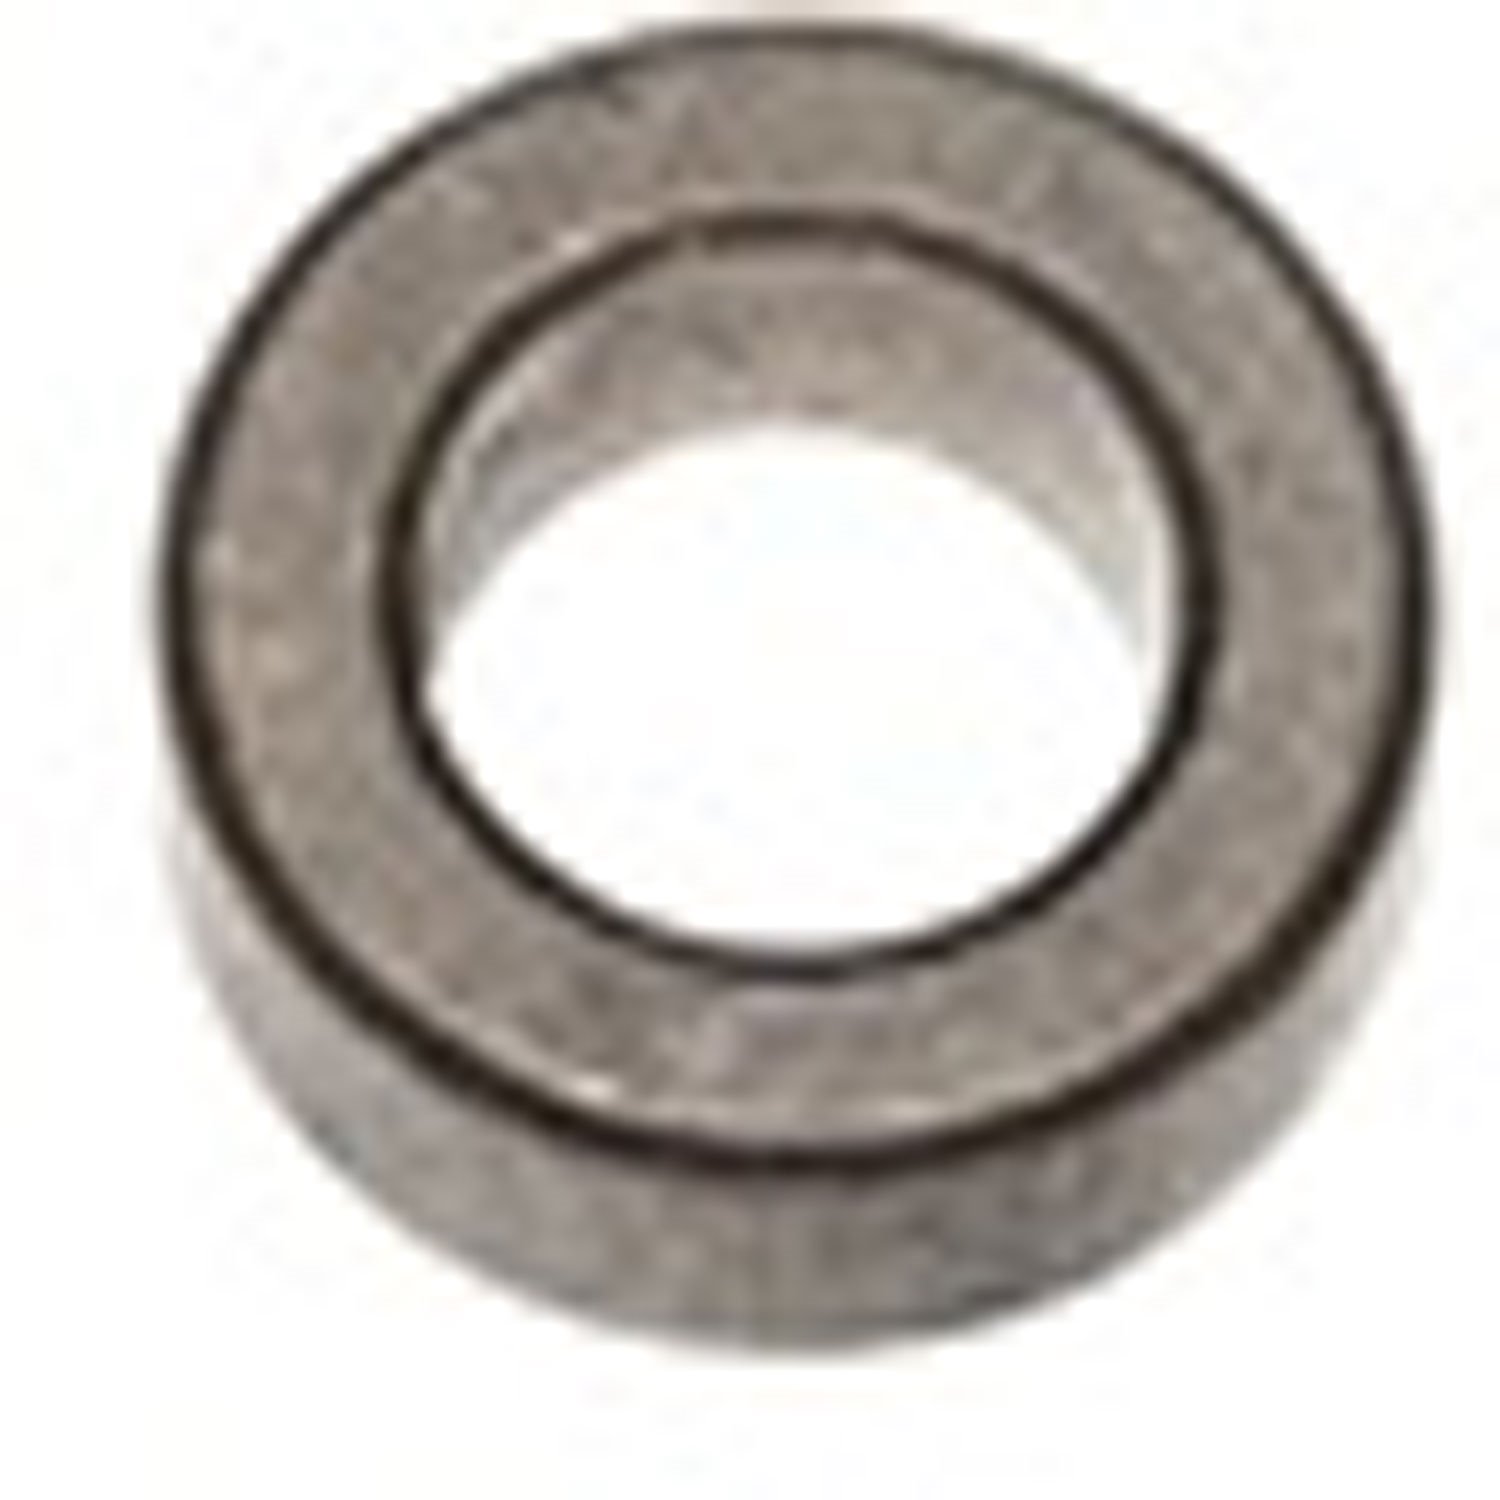 This clutch pilot bushing from Omix-ADA is used in all 134 cubic inch engines and the 149/161 cubic